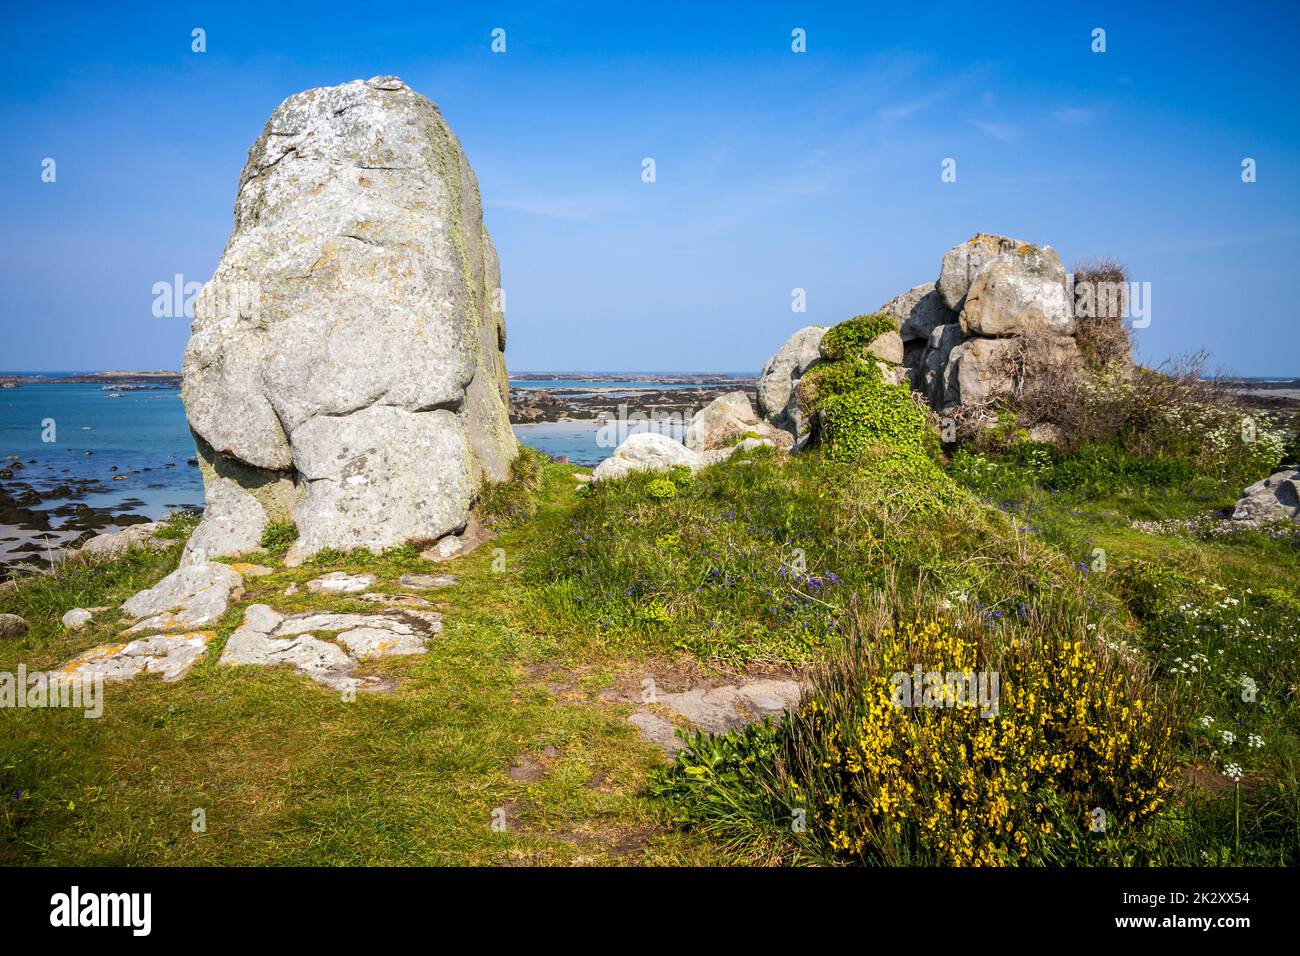 Chausey island Brittany, France Stock Photo